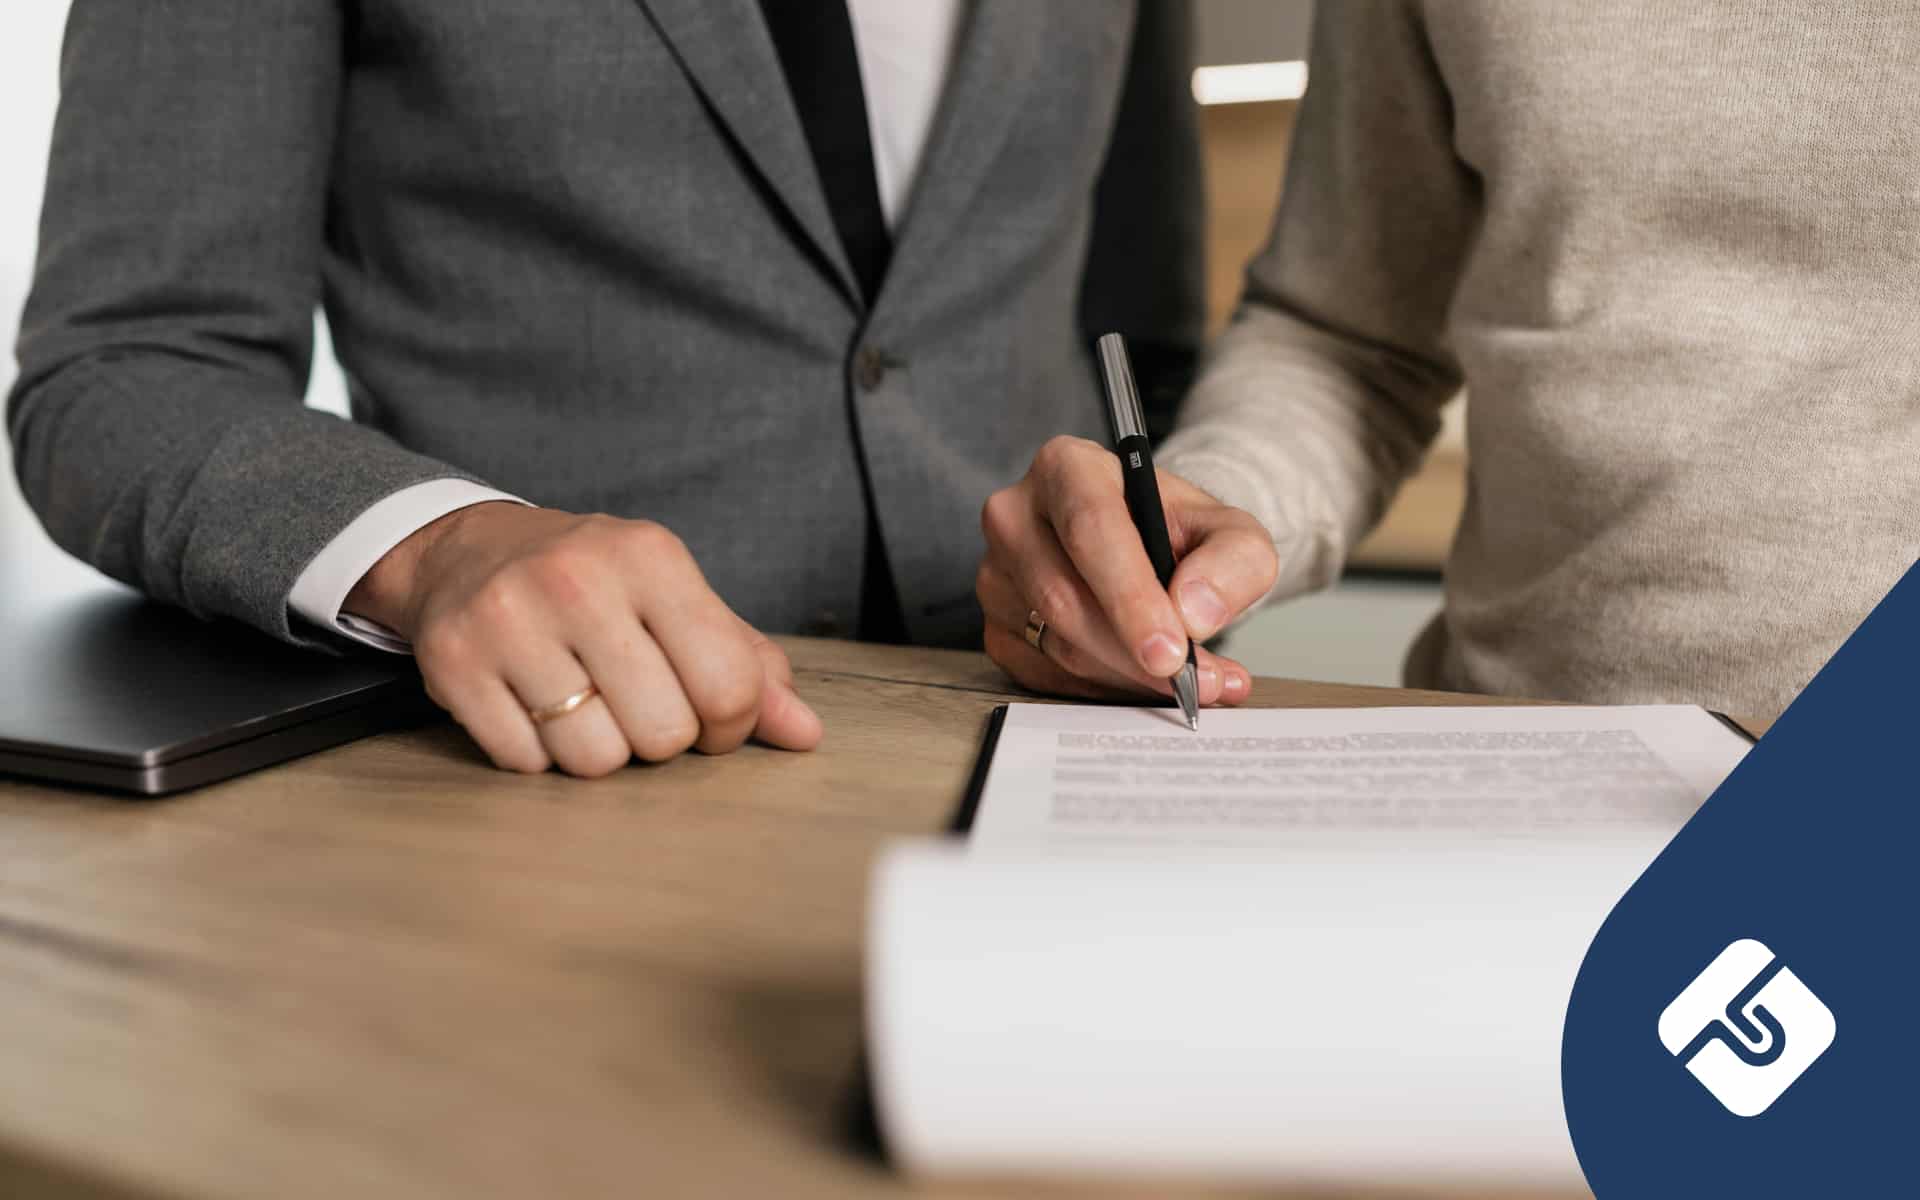 Can An Employer Force You To Sign A New Contract?